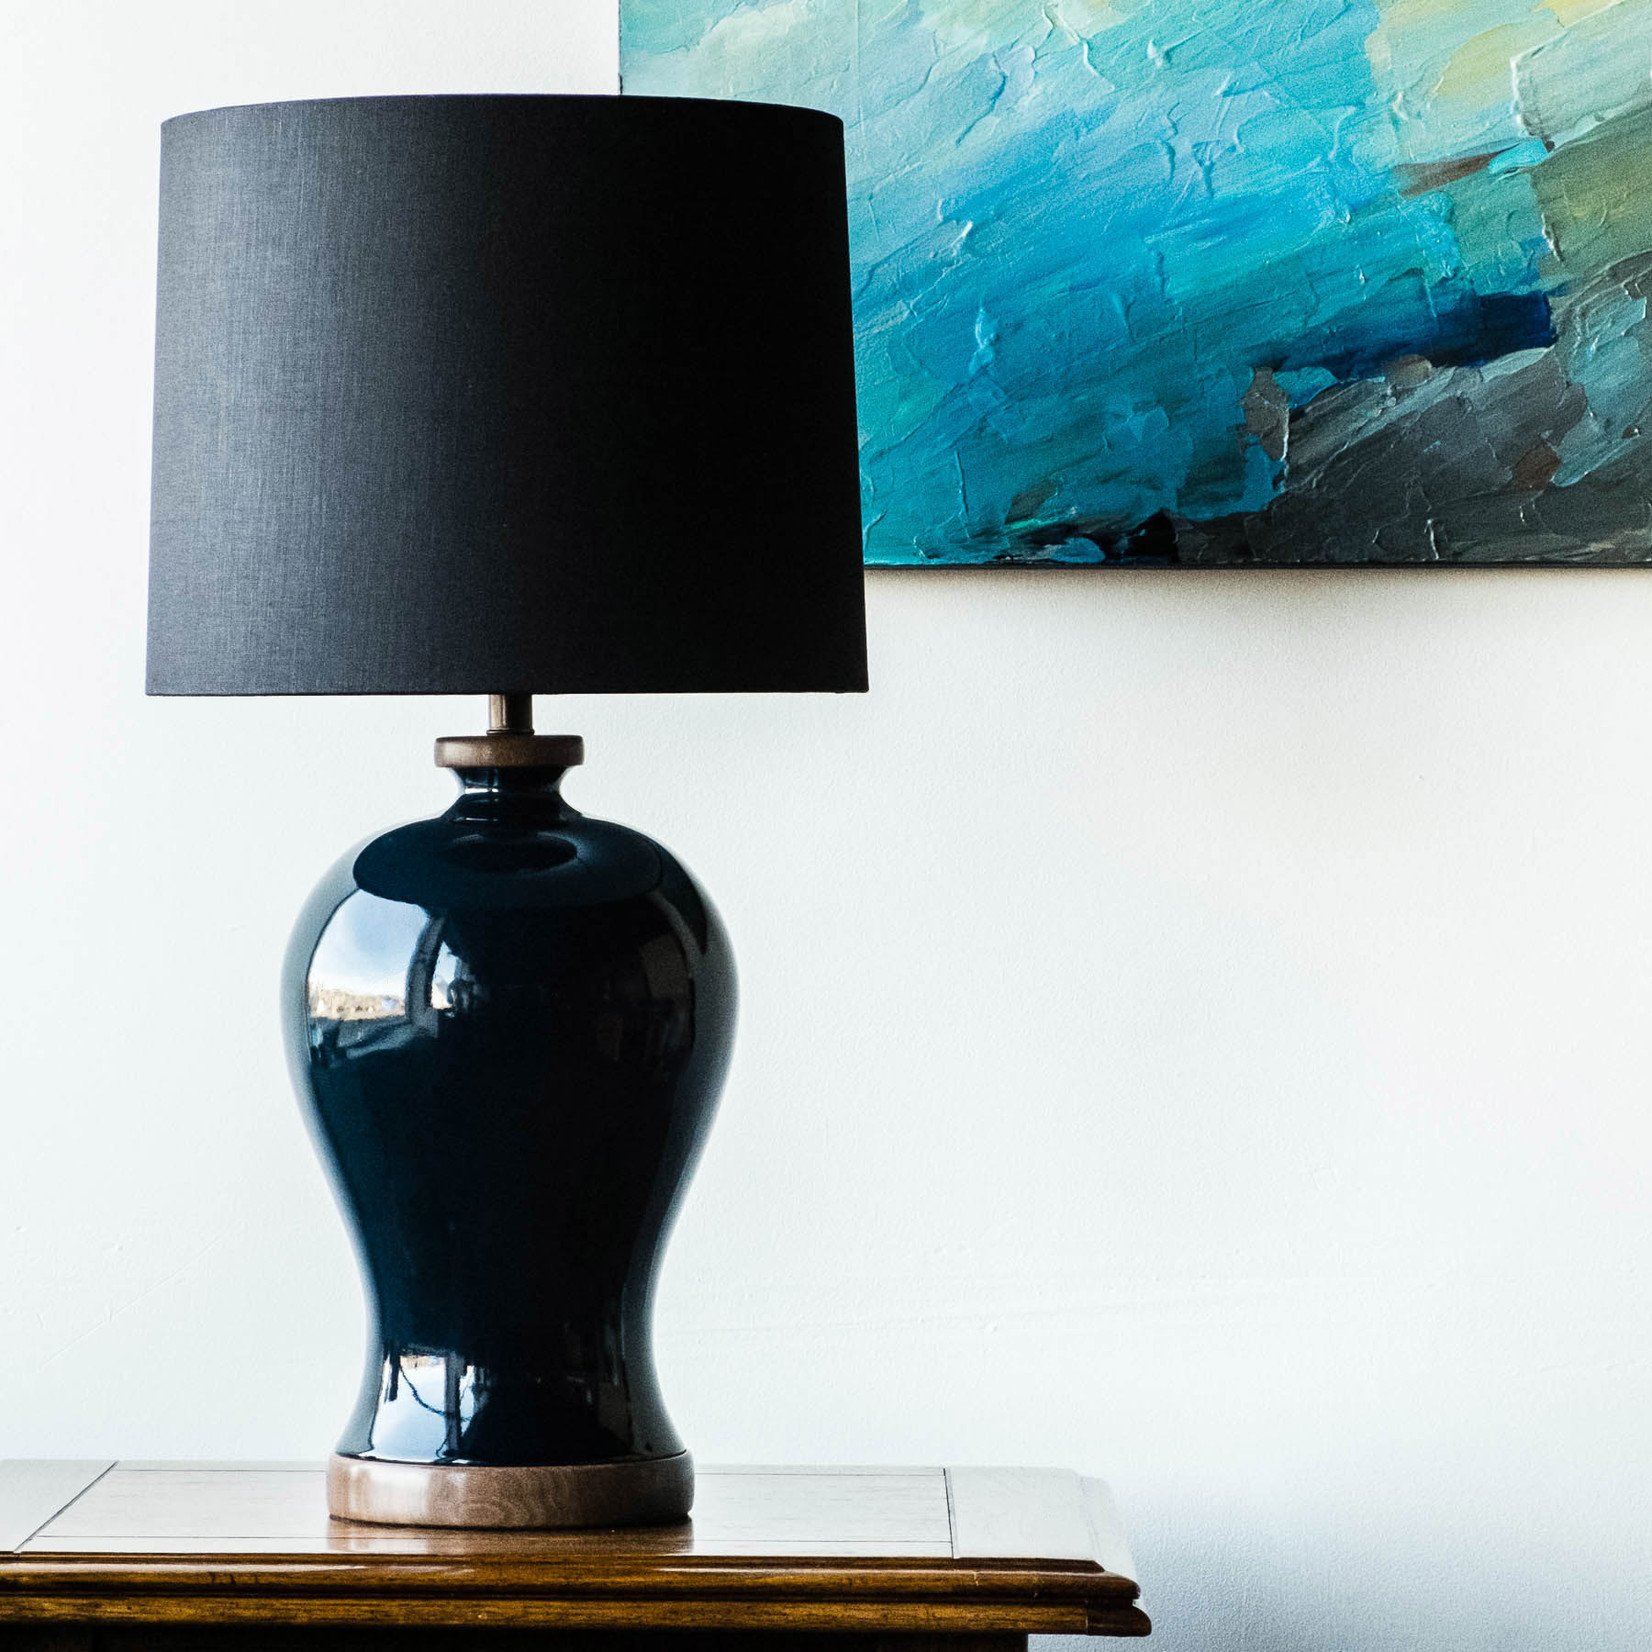 Lawrence & Scott Dashiell Table Lamp in Steel Blue Crackle with Walnut Base